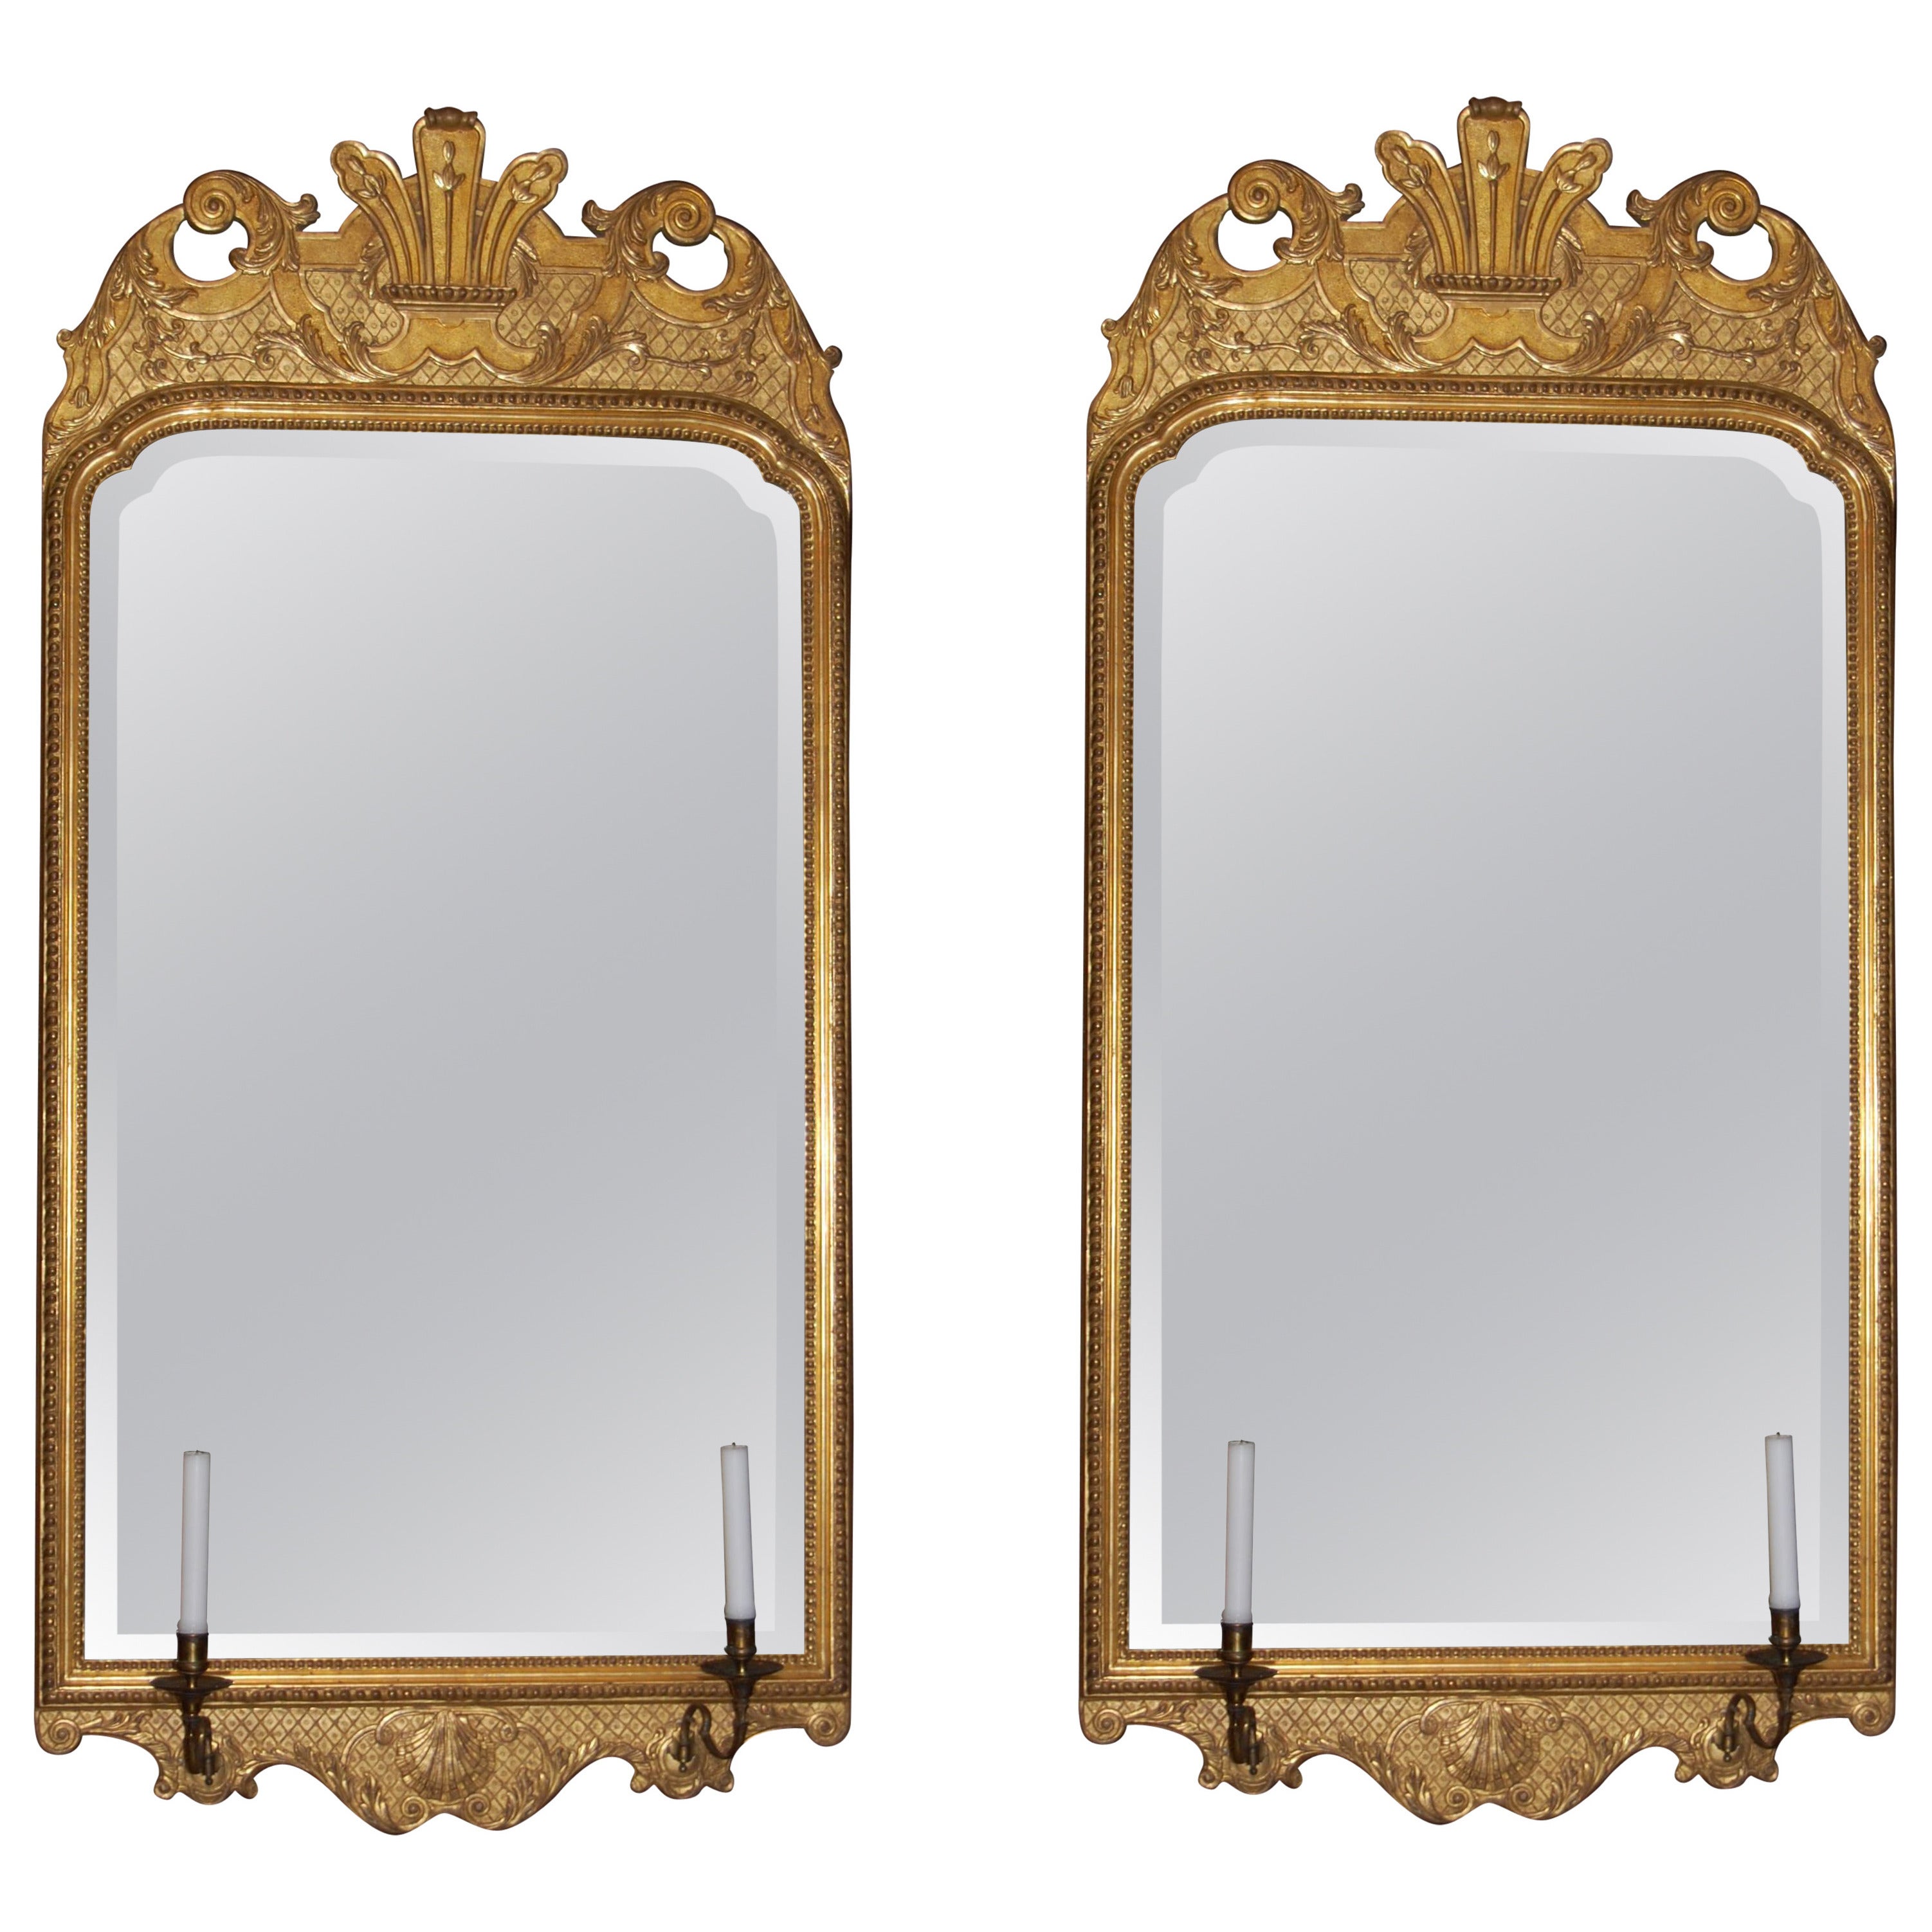 Two Turn of the Century Gilt Mirrors in the Style of George II